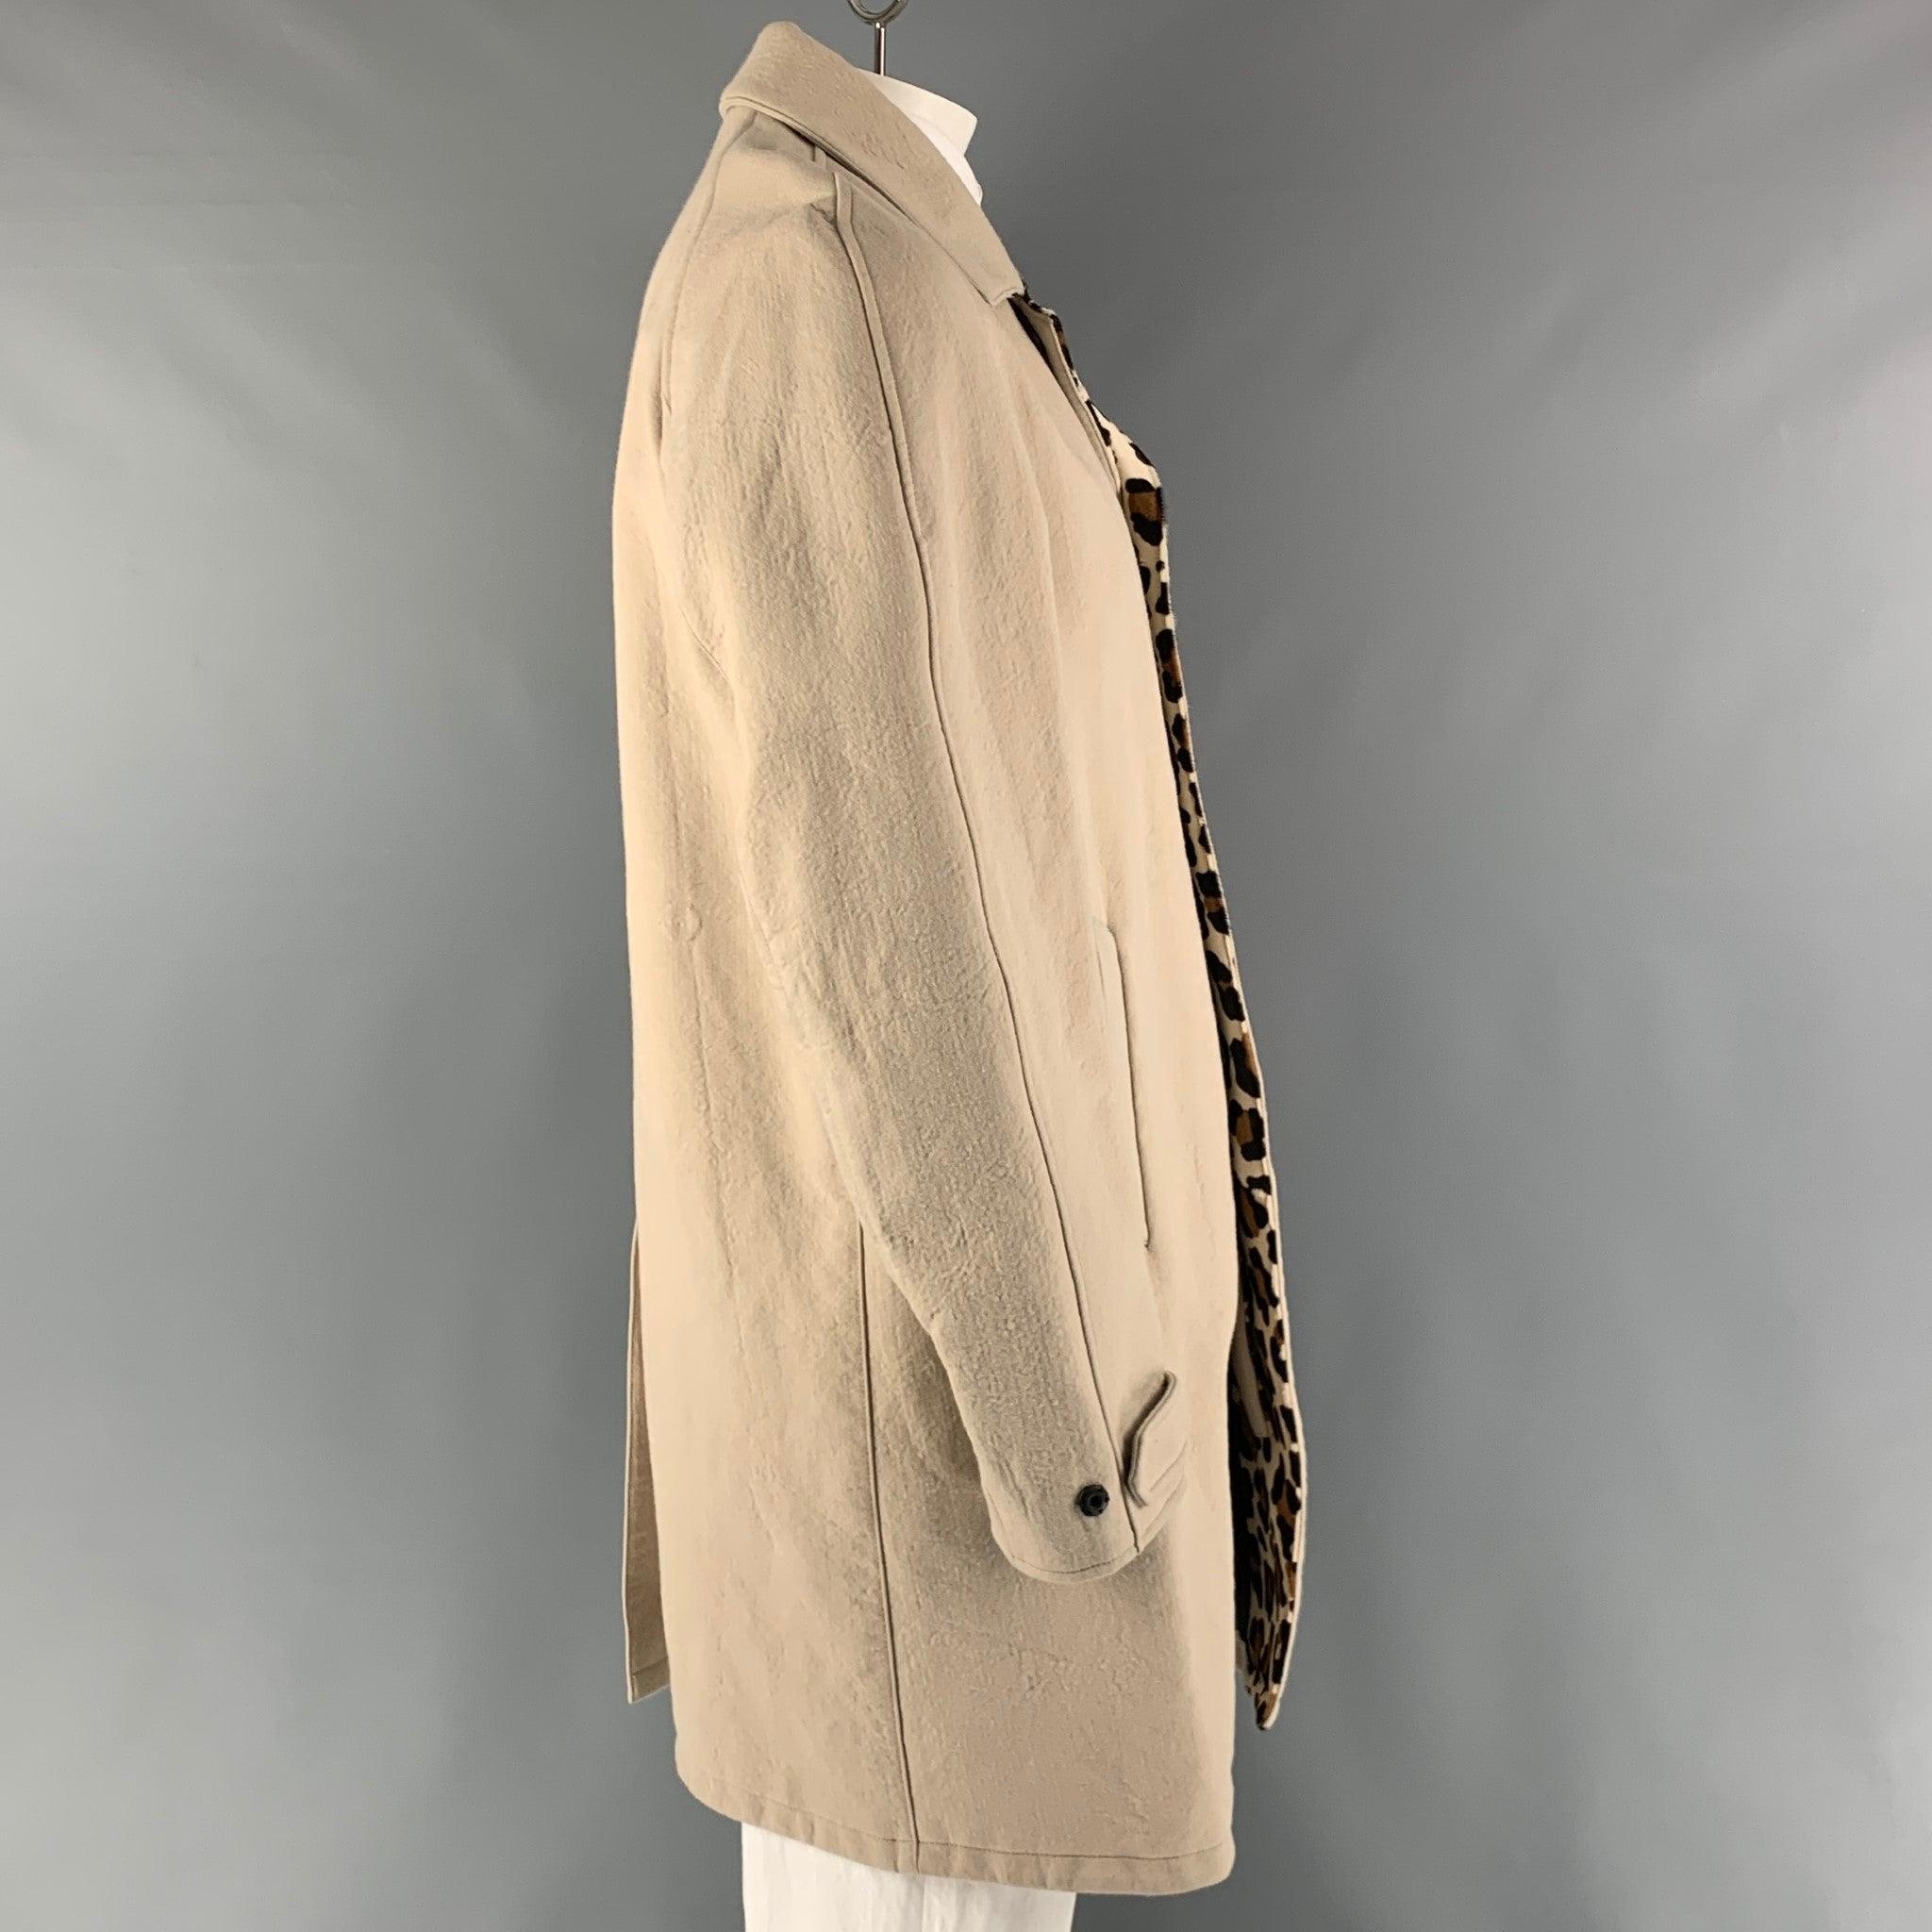 BURBERRY PRORSUM Long Coat comes in a beige canvas woven material with a full liner featuring a real dyed animal print hair calf as an inside detail, snap buttons closure, hidden placket,
 single breasted, and a raglan style. Made in Italy.Very Good